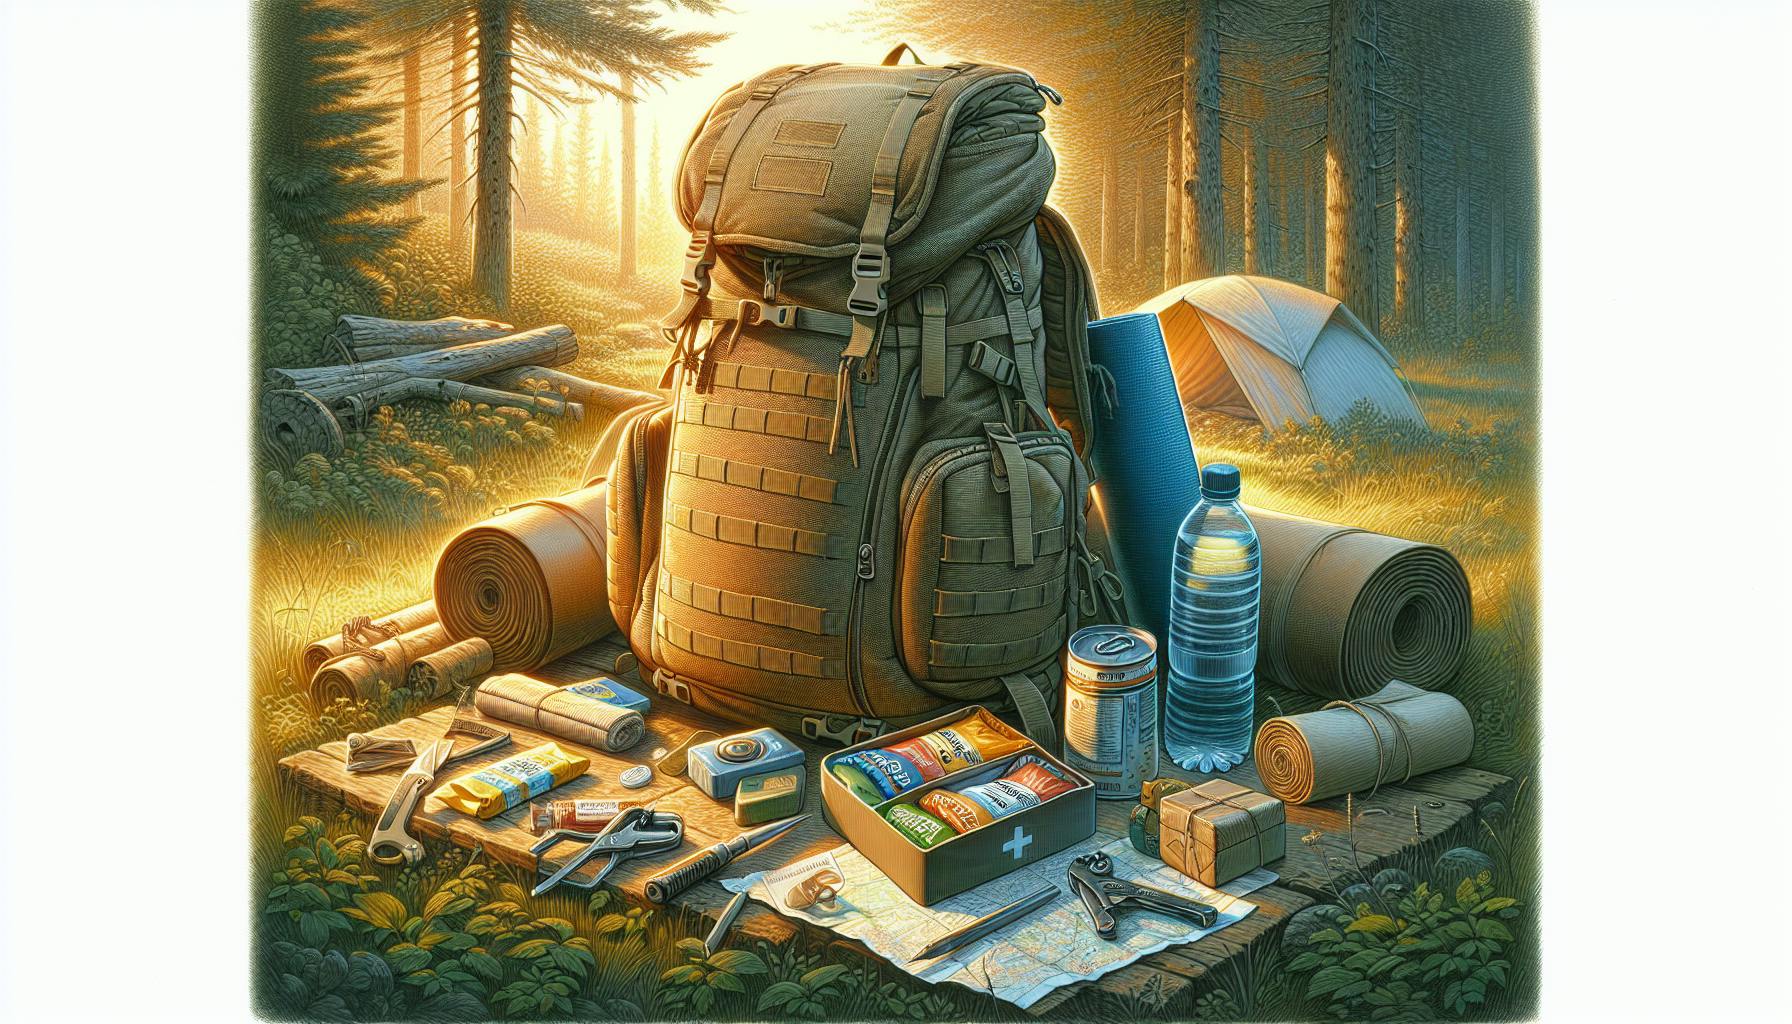 72 Hour Backpack Essentials for Beginners